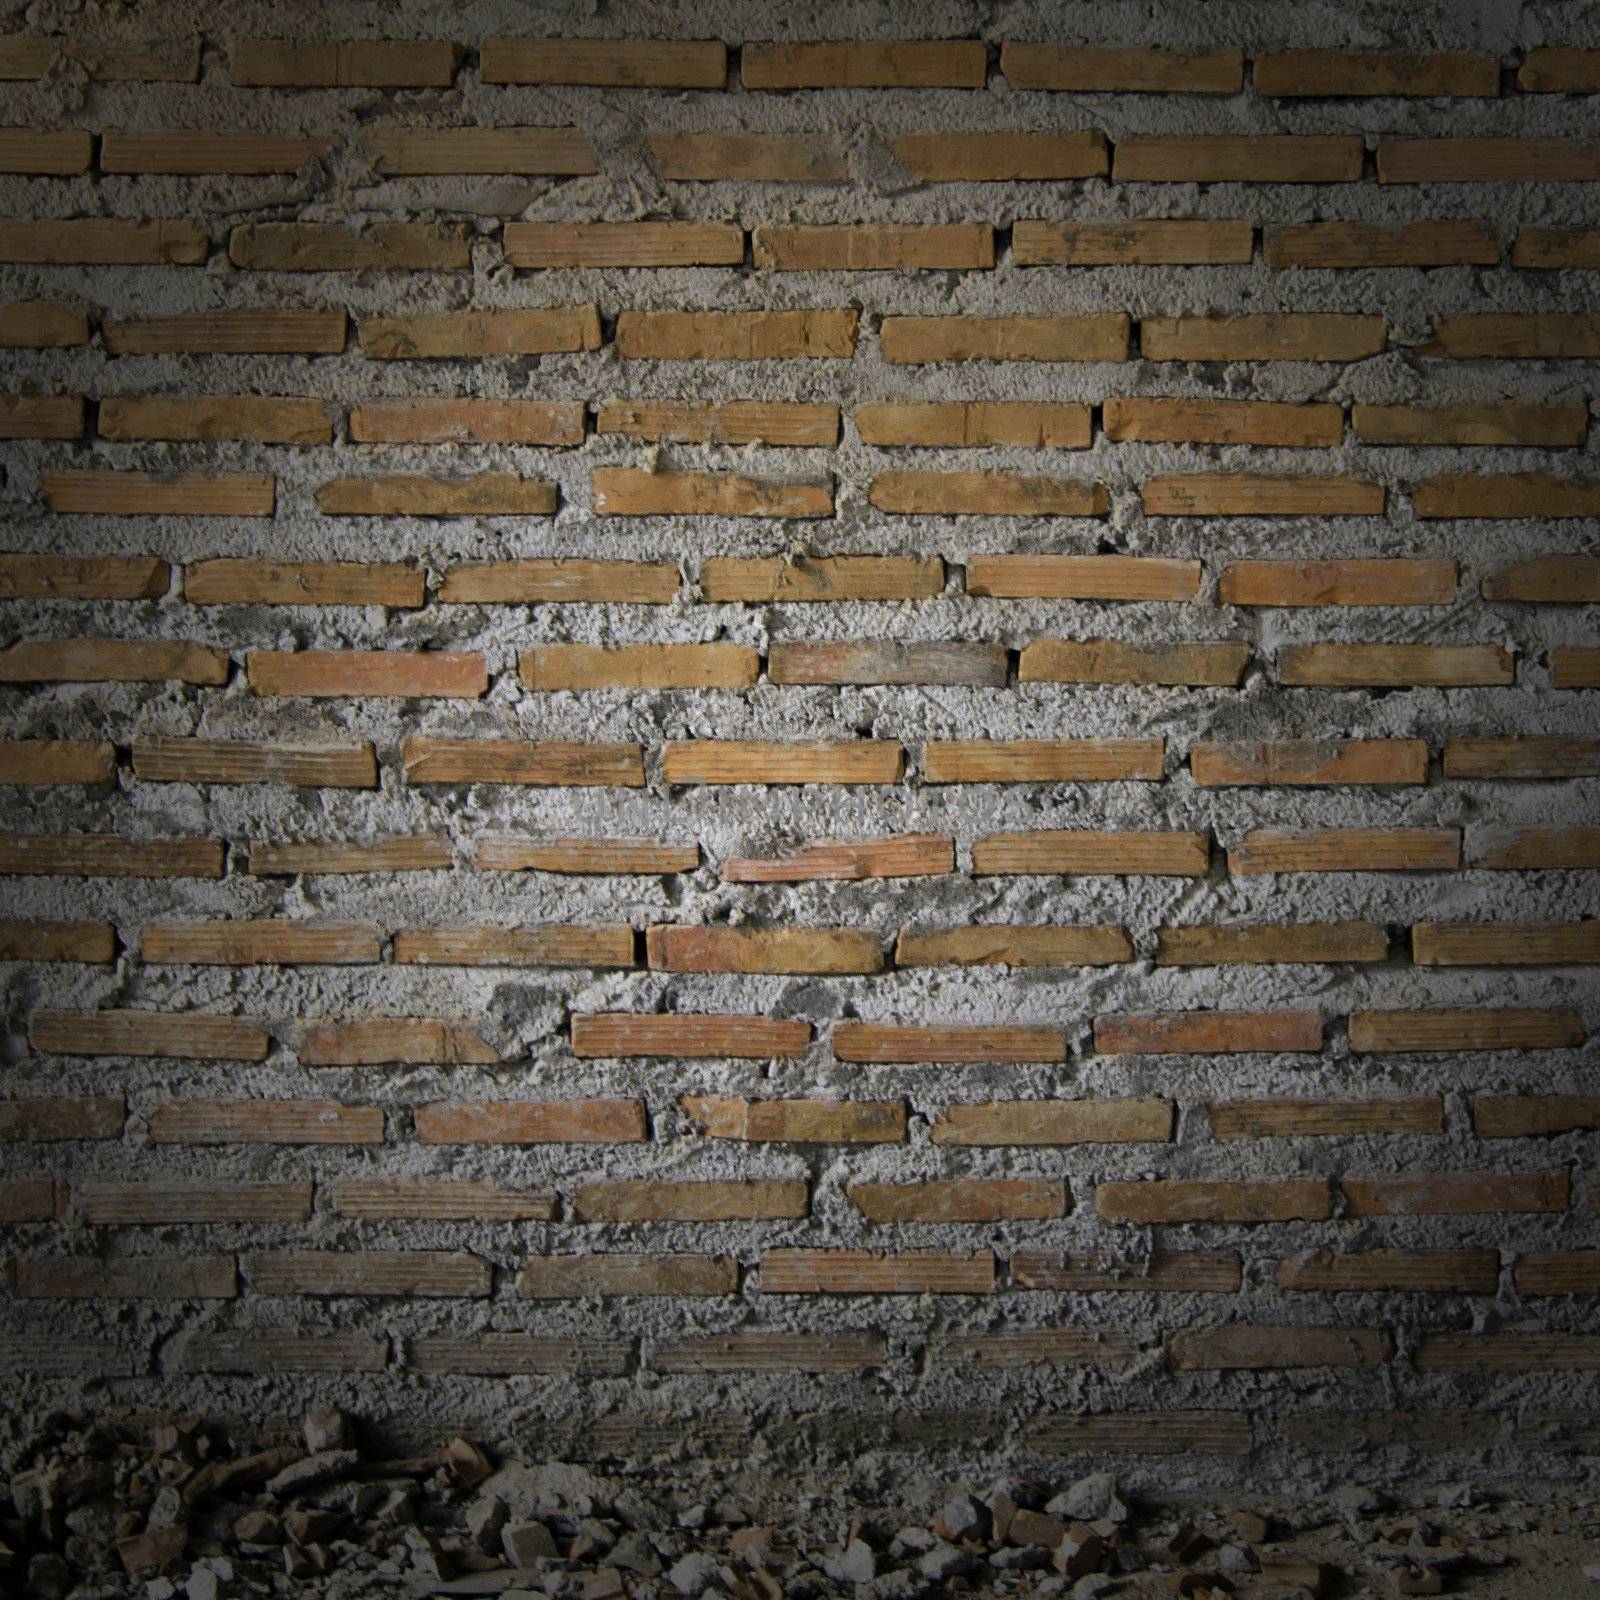 The Background of the Pattern of the Brick Wall, grunge material